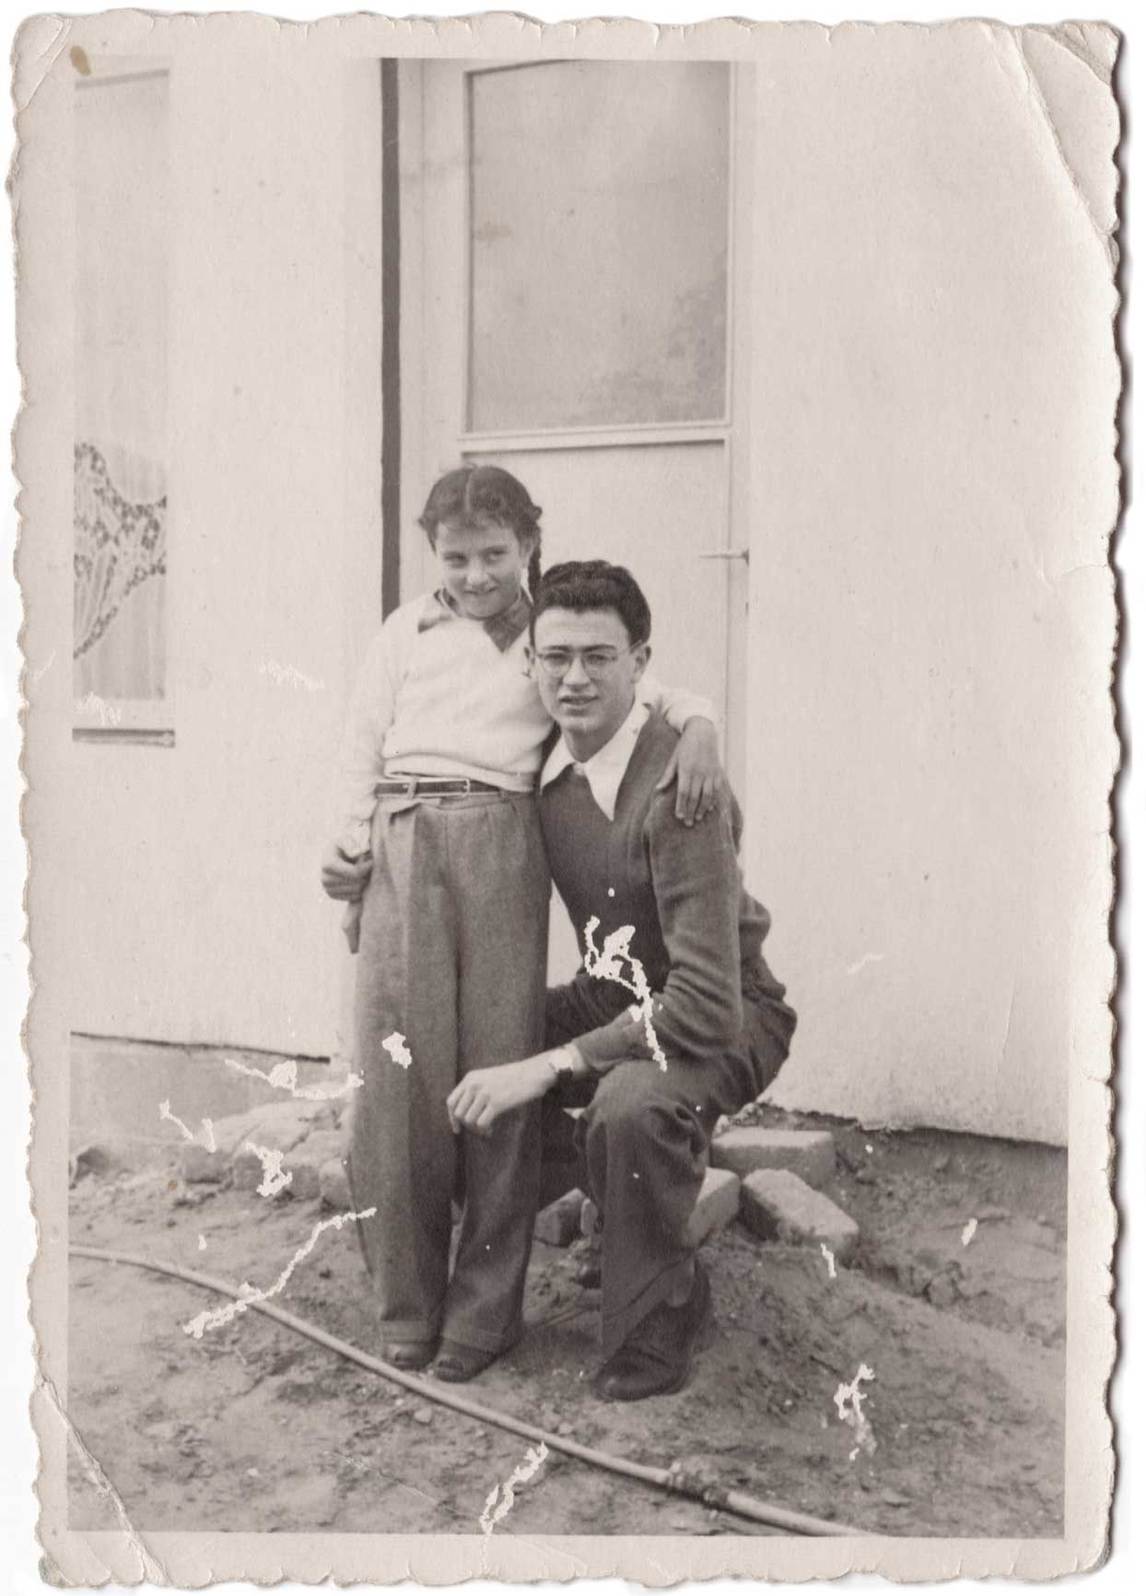 Zipora and Sorel in front of the family store in Israel, c.1952